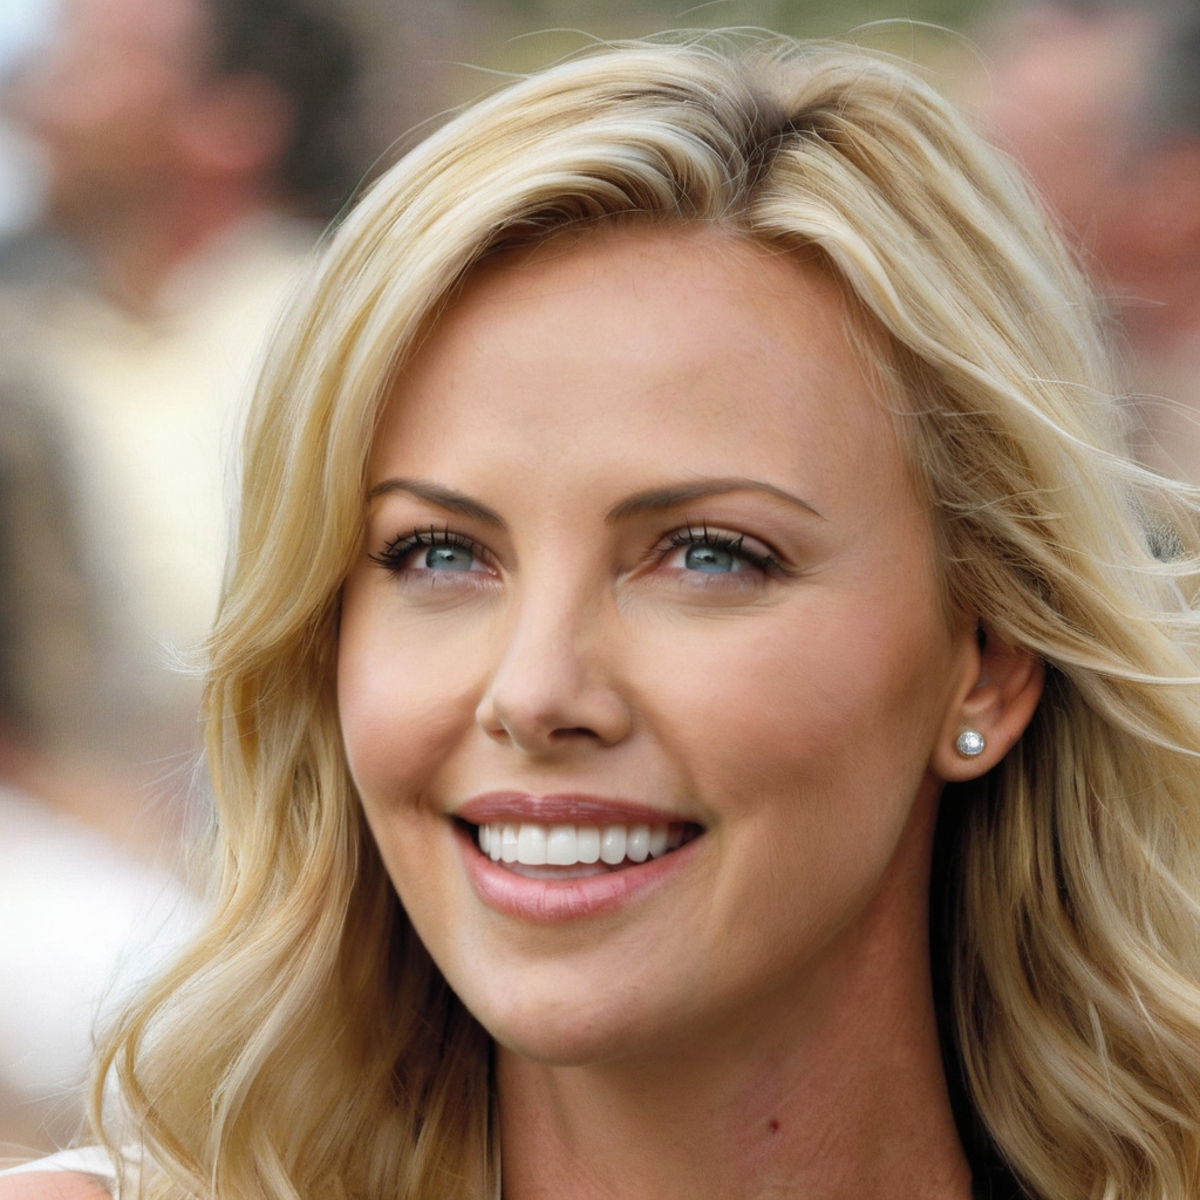 A smiling blonde woman with blue eyes.